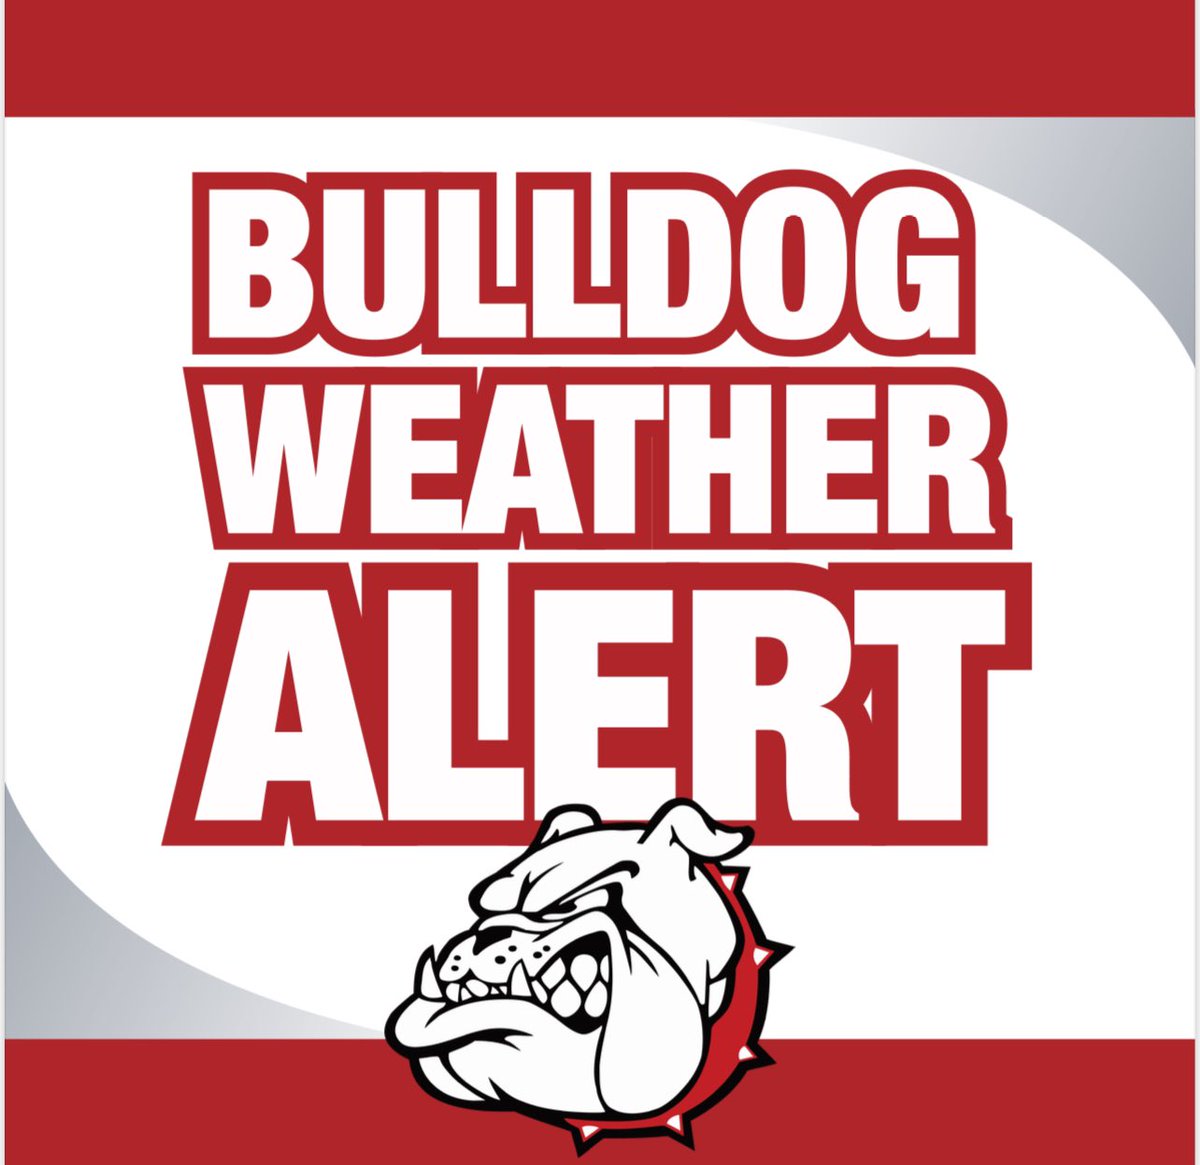 ❄️❄️Due to extreme cold temperatures all Navarro College campuses will be closed on Tuesday, January 16.  While all face-to-face classes are canceled, students are encouraged to log into each of their courses in Canvas for additional instructions.❄️❄️